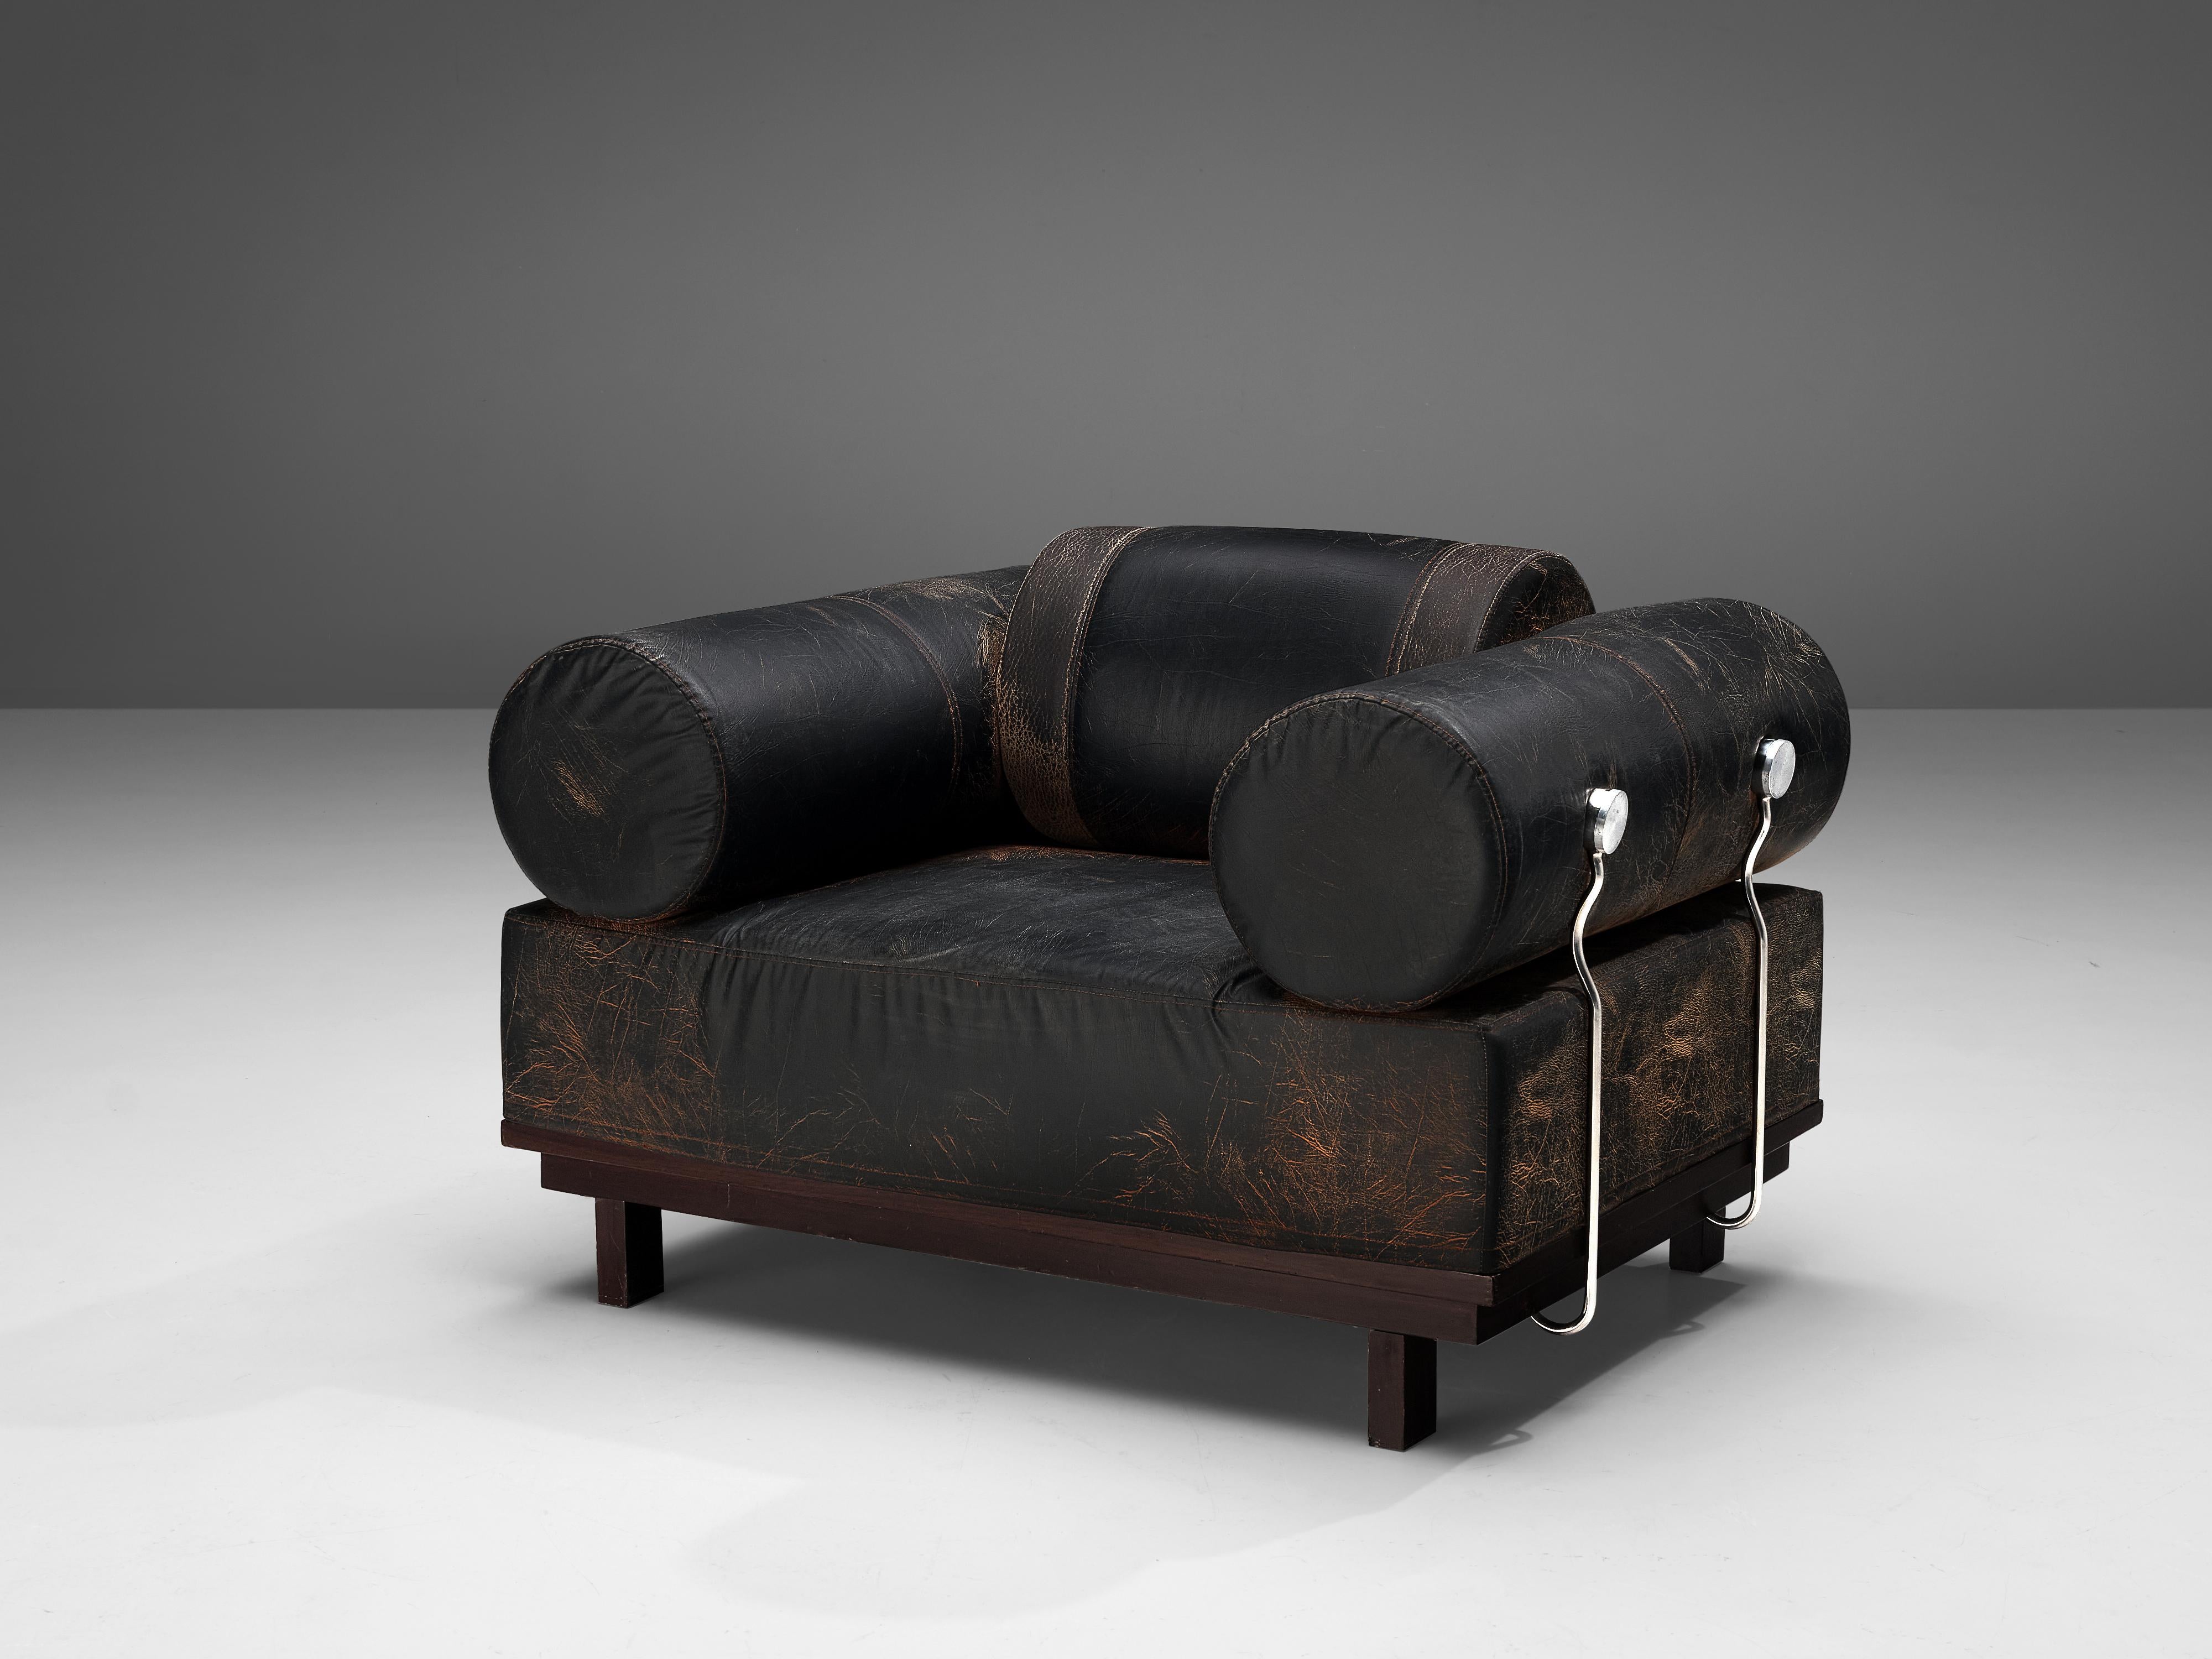 Lounge chair, leatherette, wood, metal, Europe, 1980s.

Bulky lounge chair with ottoman. The chair is characterized by multiple features that create a rather unique looking item. On the one hand side, the large size of the chair is enormous. The